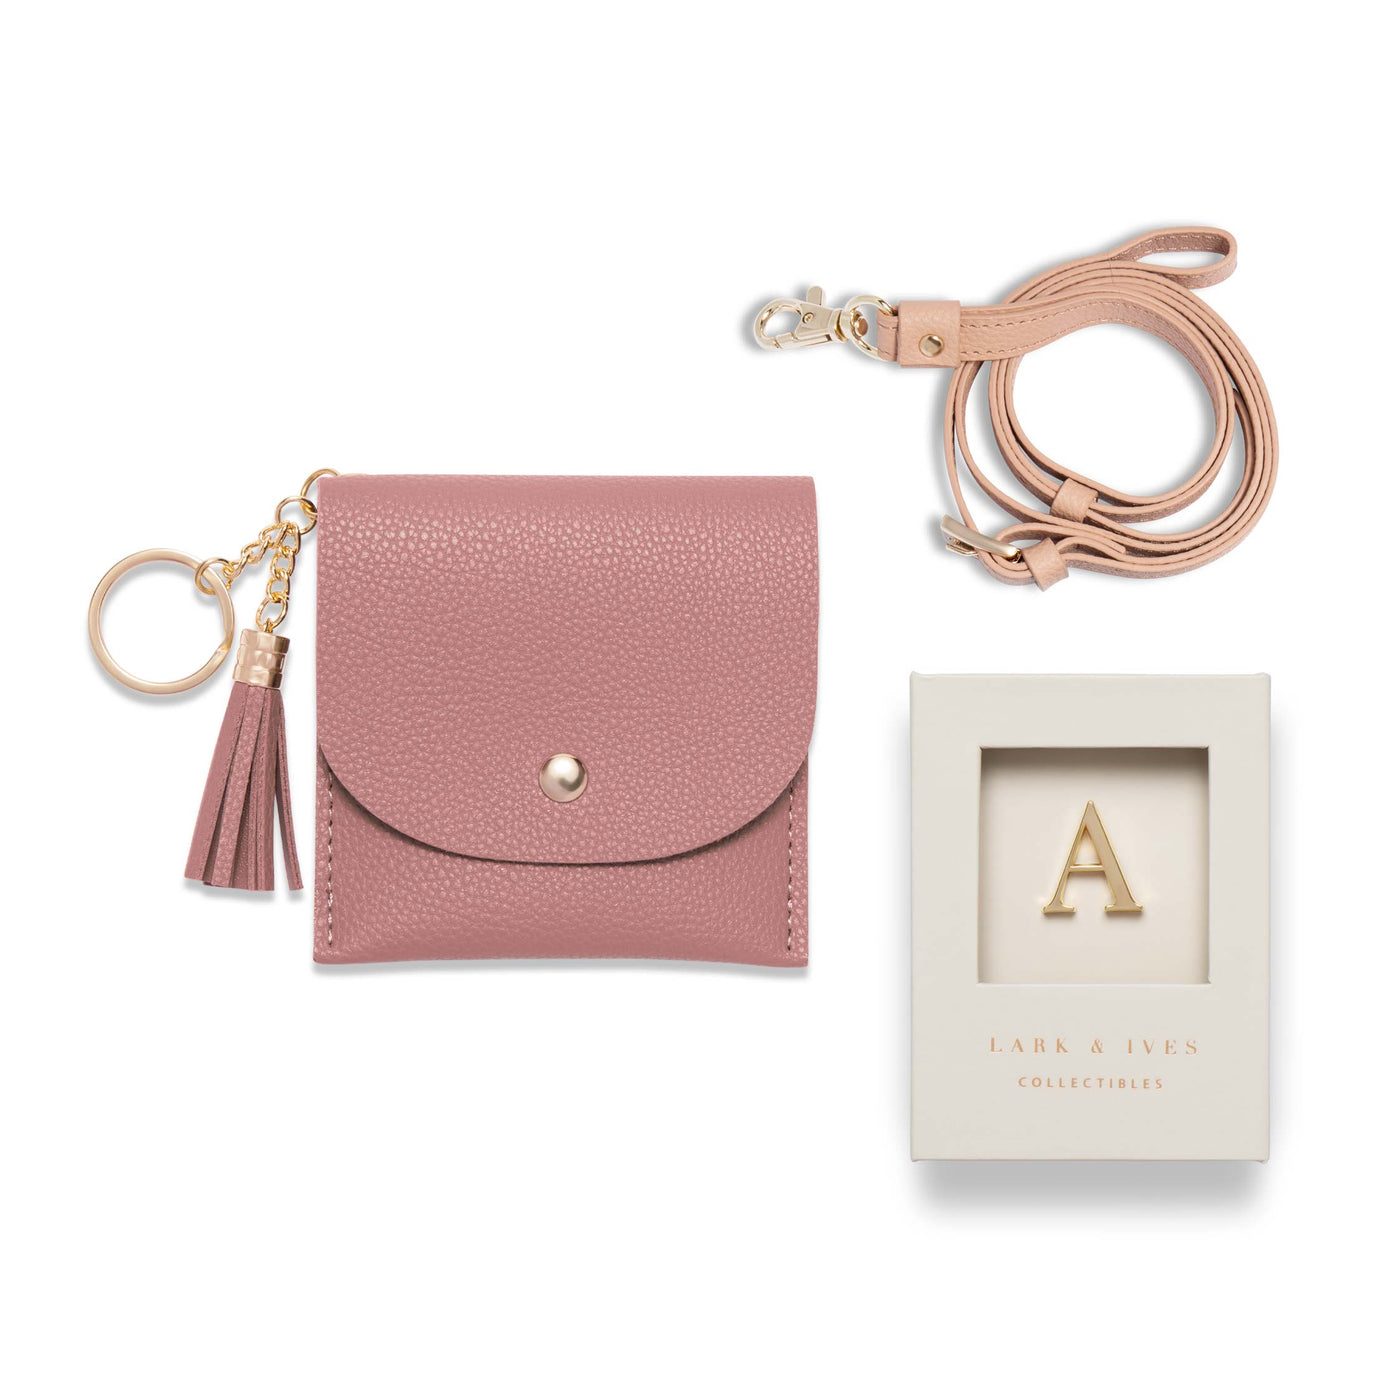 Lark and Ives / Vegan Leather Accessories / Small Accessories / Wallet / Mini Wallet / Card Case / Card Holder / Button snap closure / Flap Wallet / Card Purse with Gold Button and Keyring / Lanyard / Card Purse with Lanyard  and Monogram Pin  / Dark Pink